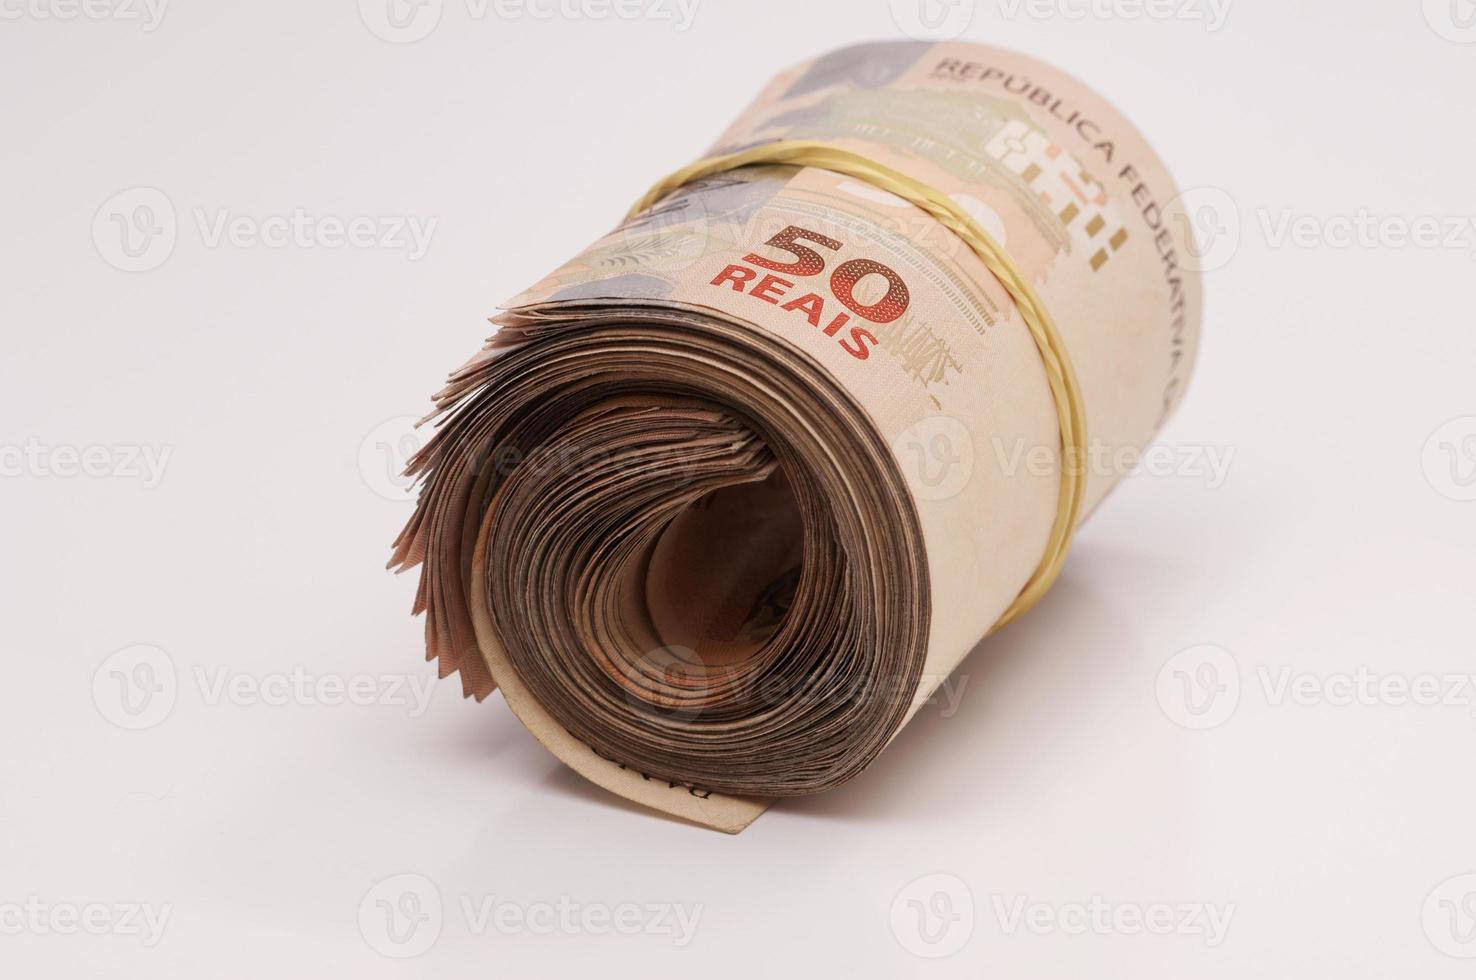 Brazilian Currency (Real) photo